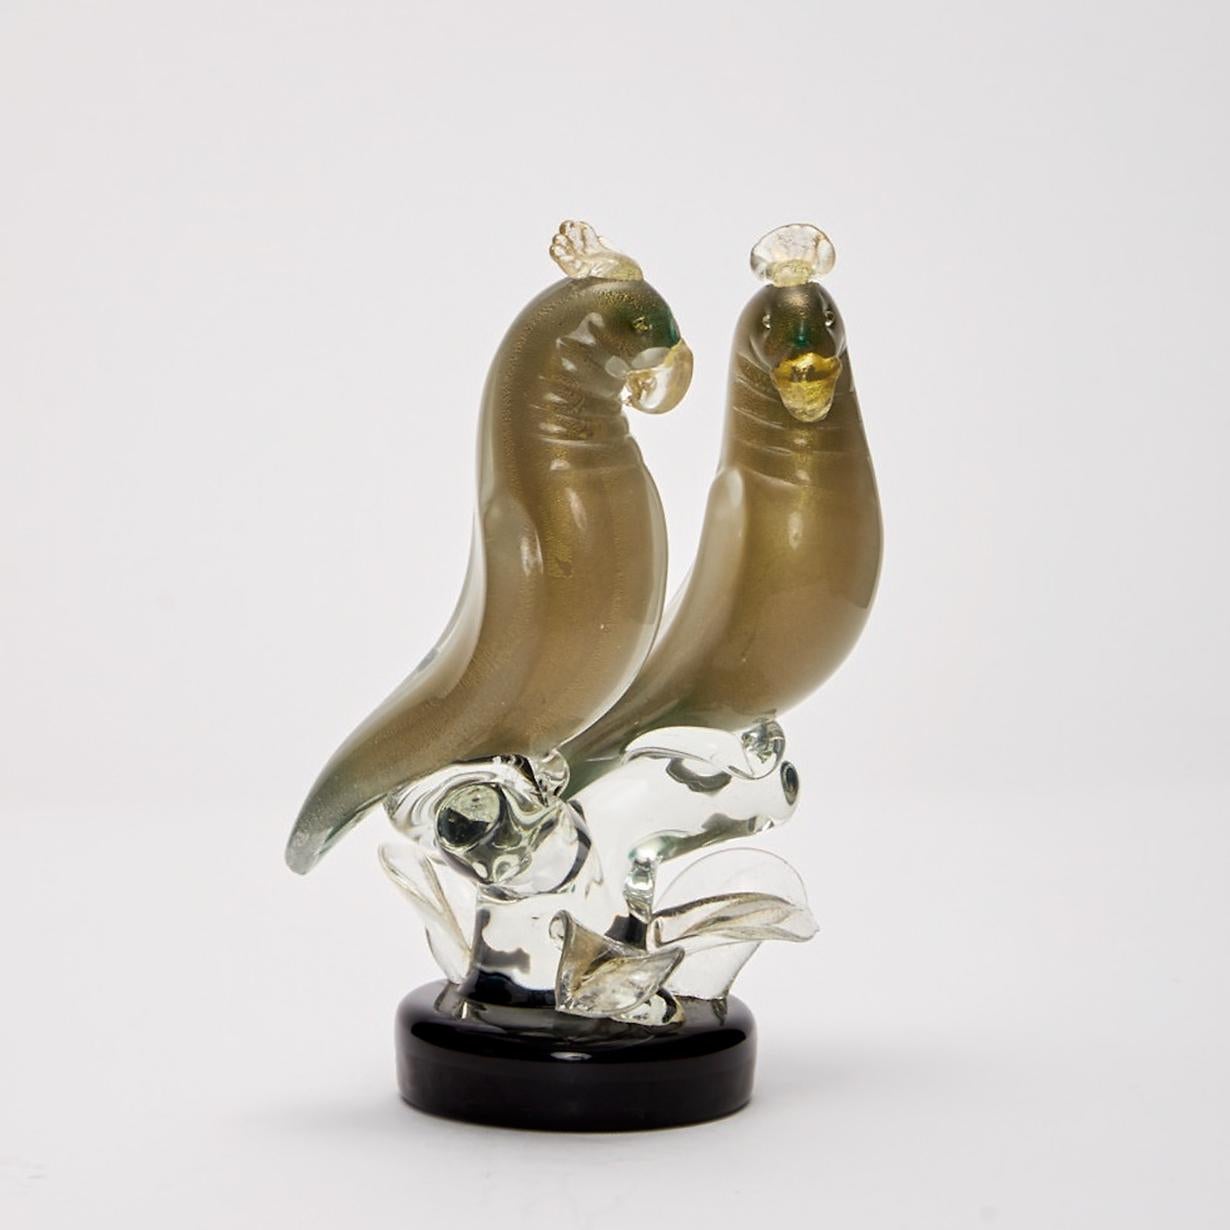 Mid-Century Modern Parrots Sculpture  by Alfredo Barbin 1950 's Applied Glass with Gold Powders  For Sale